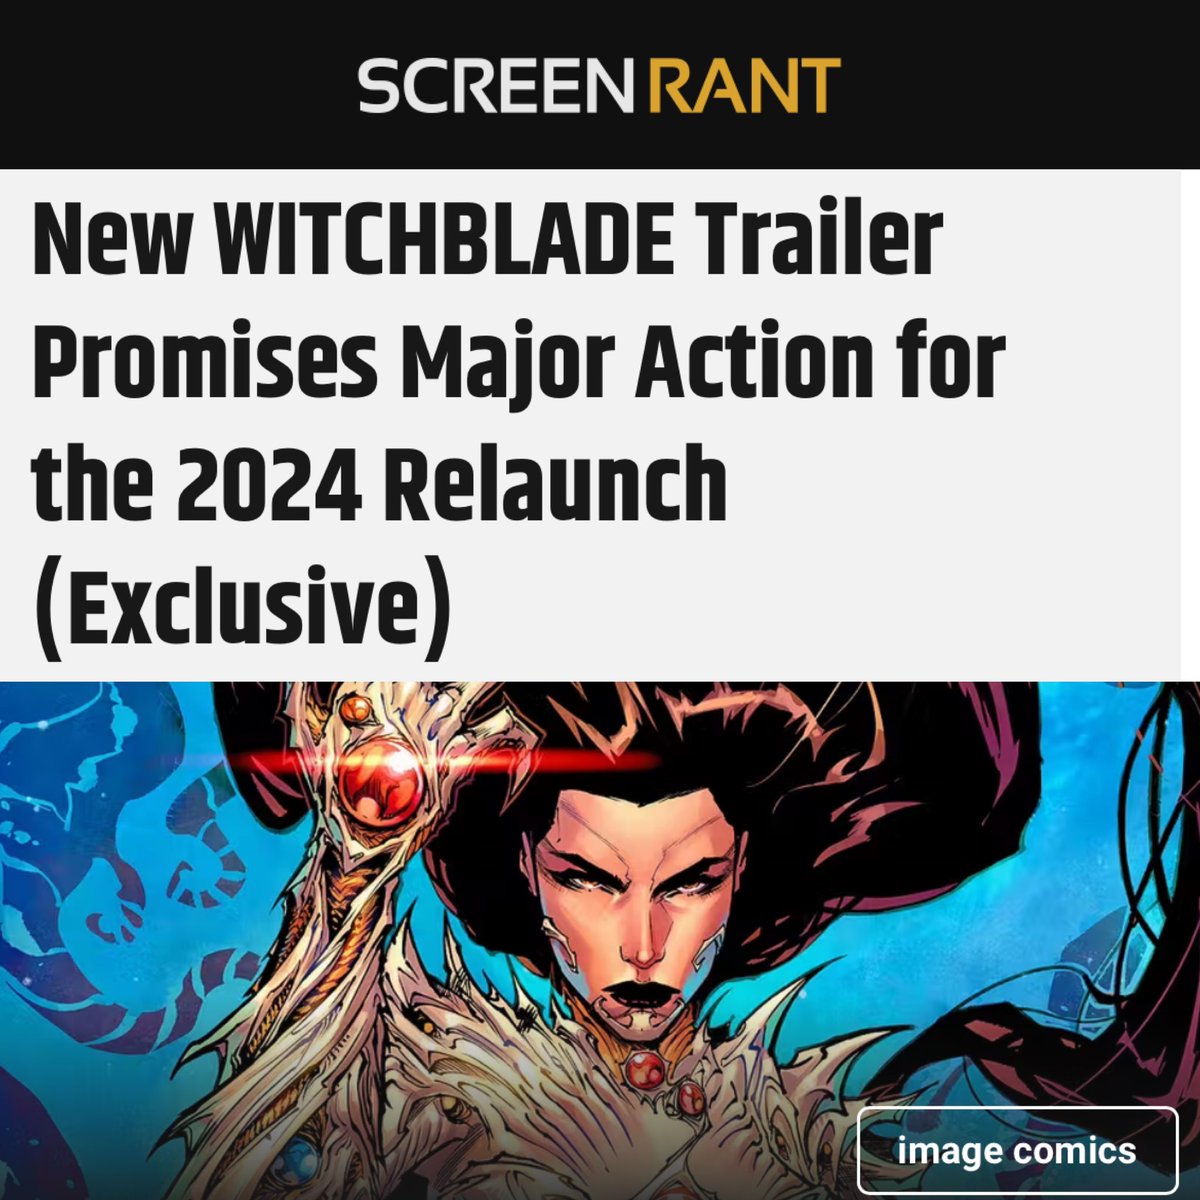 “the new Witchblade will stay true to the original series’ urban fantasy roots while taking a deep dive into Sara’s motivations and character.” - ScreenRant Trade the entire article and watch the trailer now on @ScreenRant: screenrant.com/witchblade-tra… #comicbooks #witchblade #comics